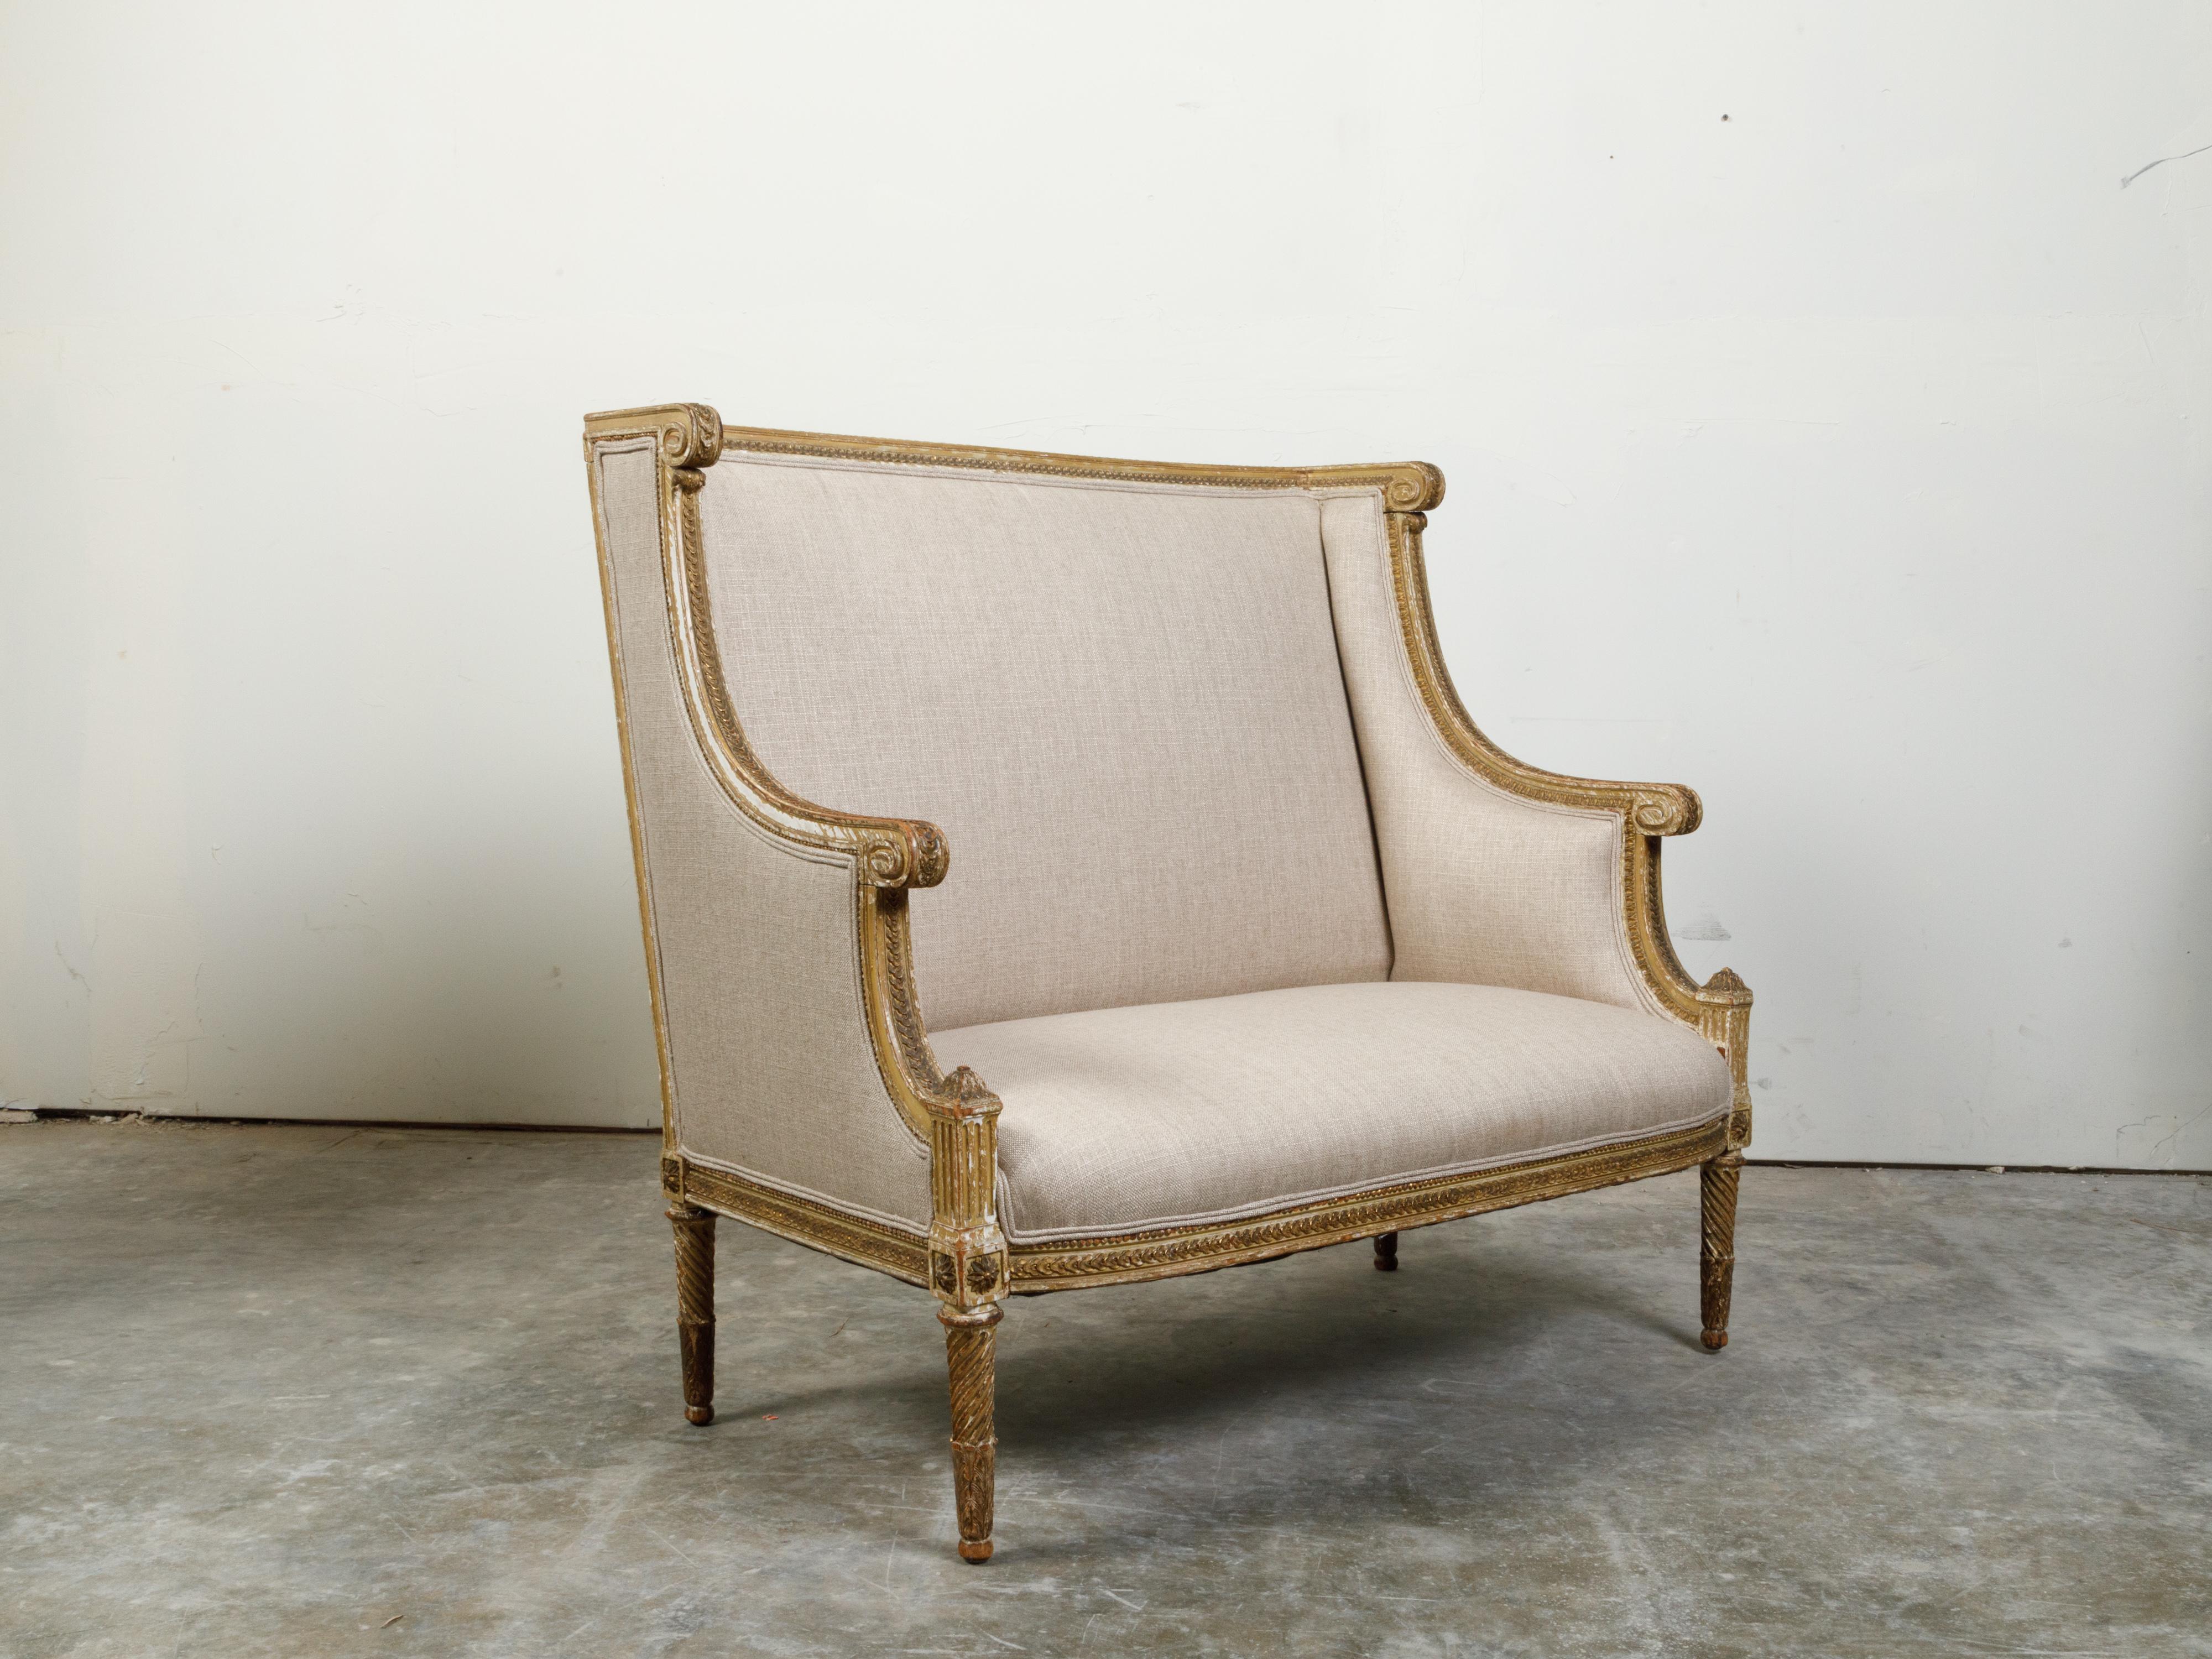 French 19th Century Louis XVI Style Giltwood Wingback Settee with Carved Motifs In Good Condition For Sale In Atlanta, GA